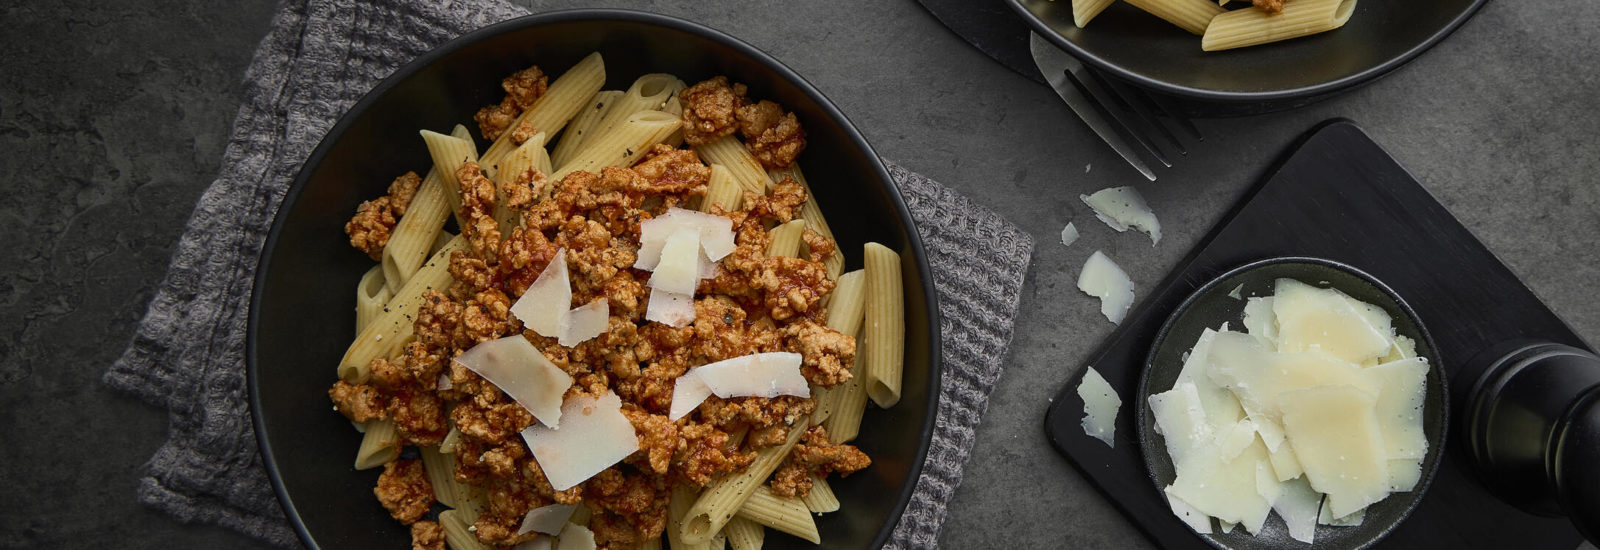 Image of Campbell's Pork Pasta with Parmesan Cheese